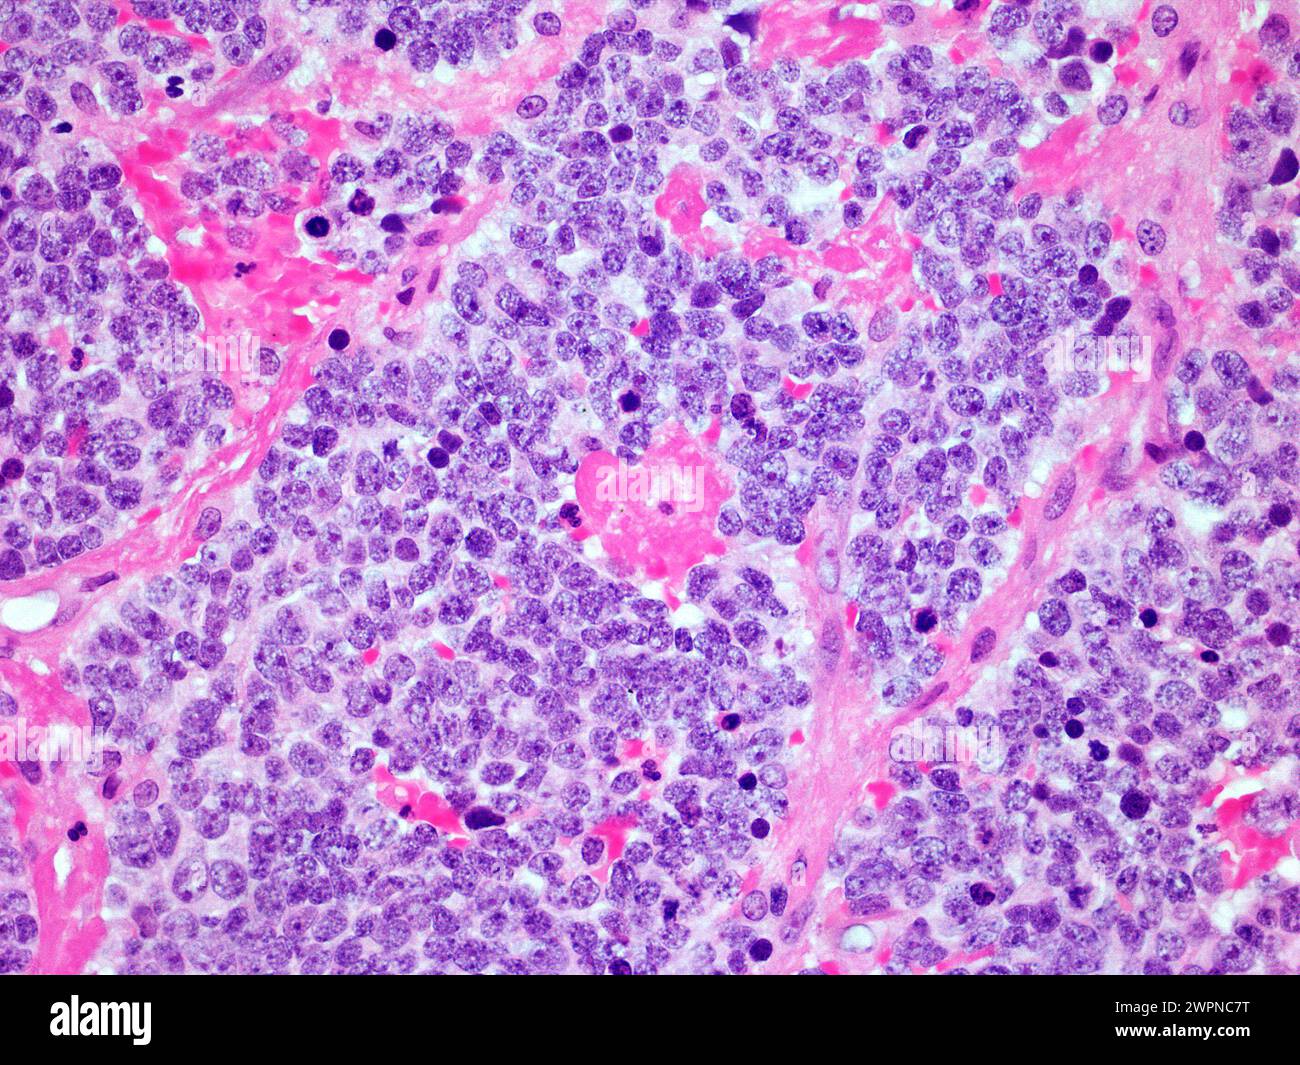 Microscopic Image of a Neuroblastoma Malignant Tumor of the Adrenal Gland Viewed at 300x Magnification with Haematoxylin and Eosin Staining Stock Photo